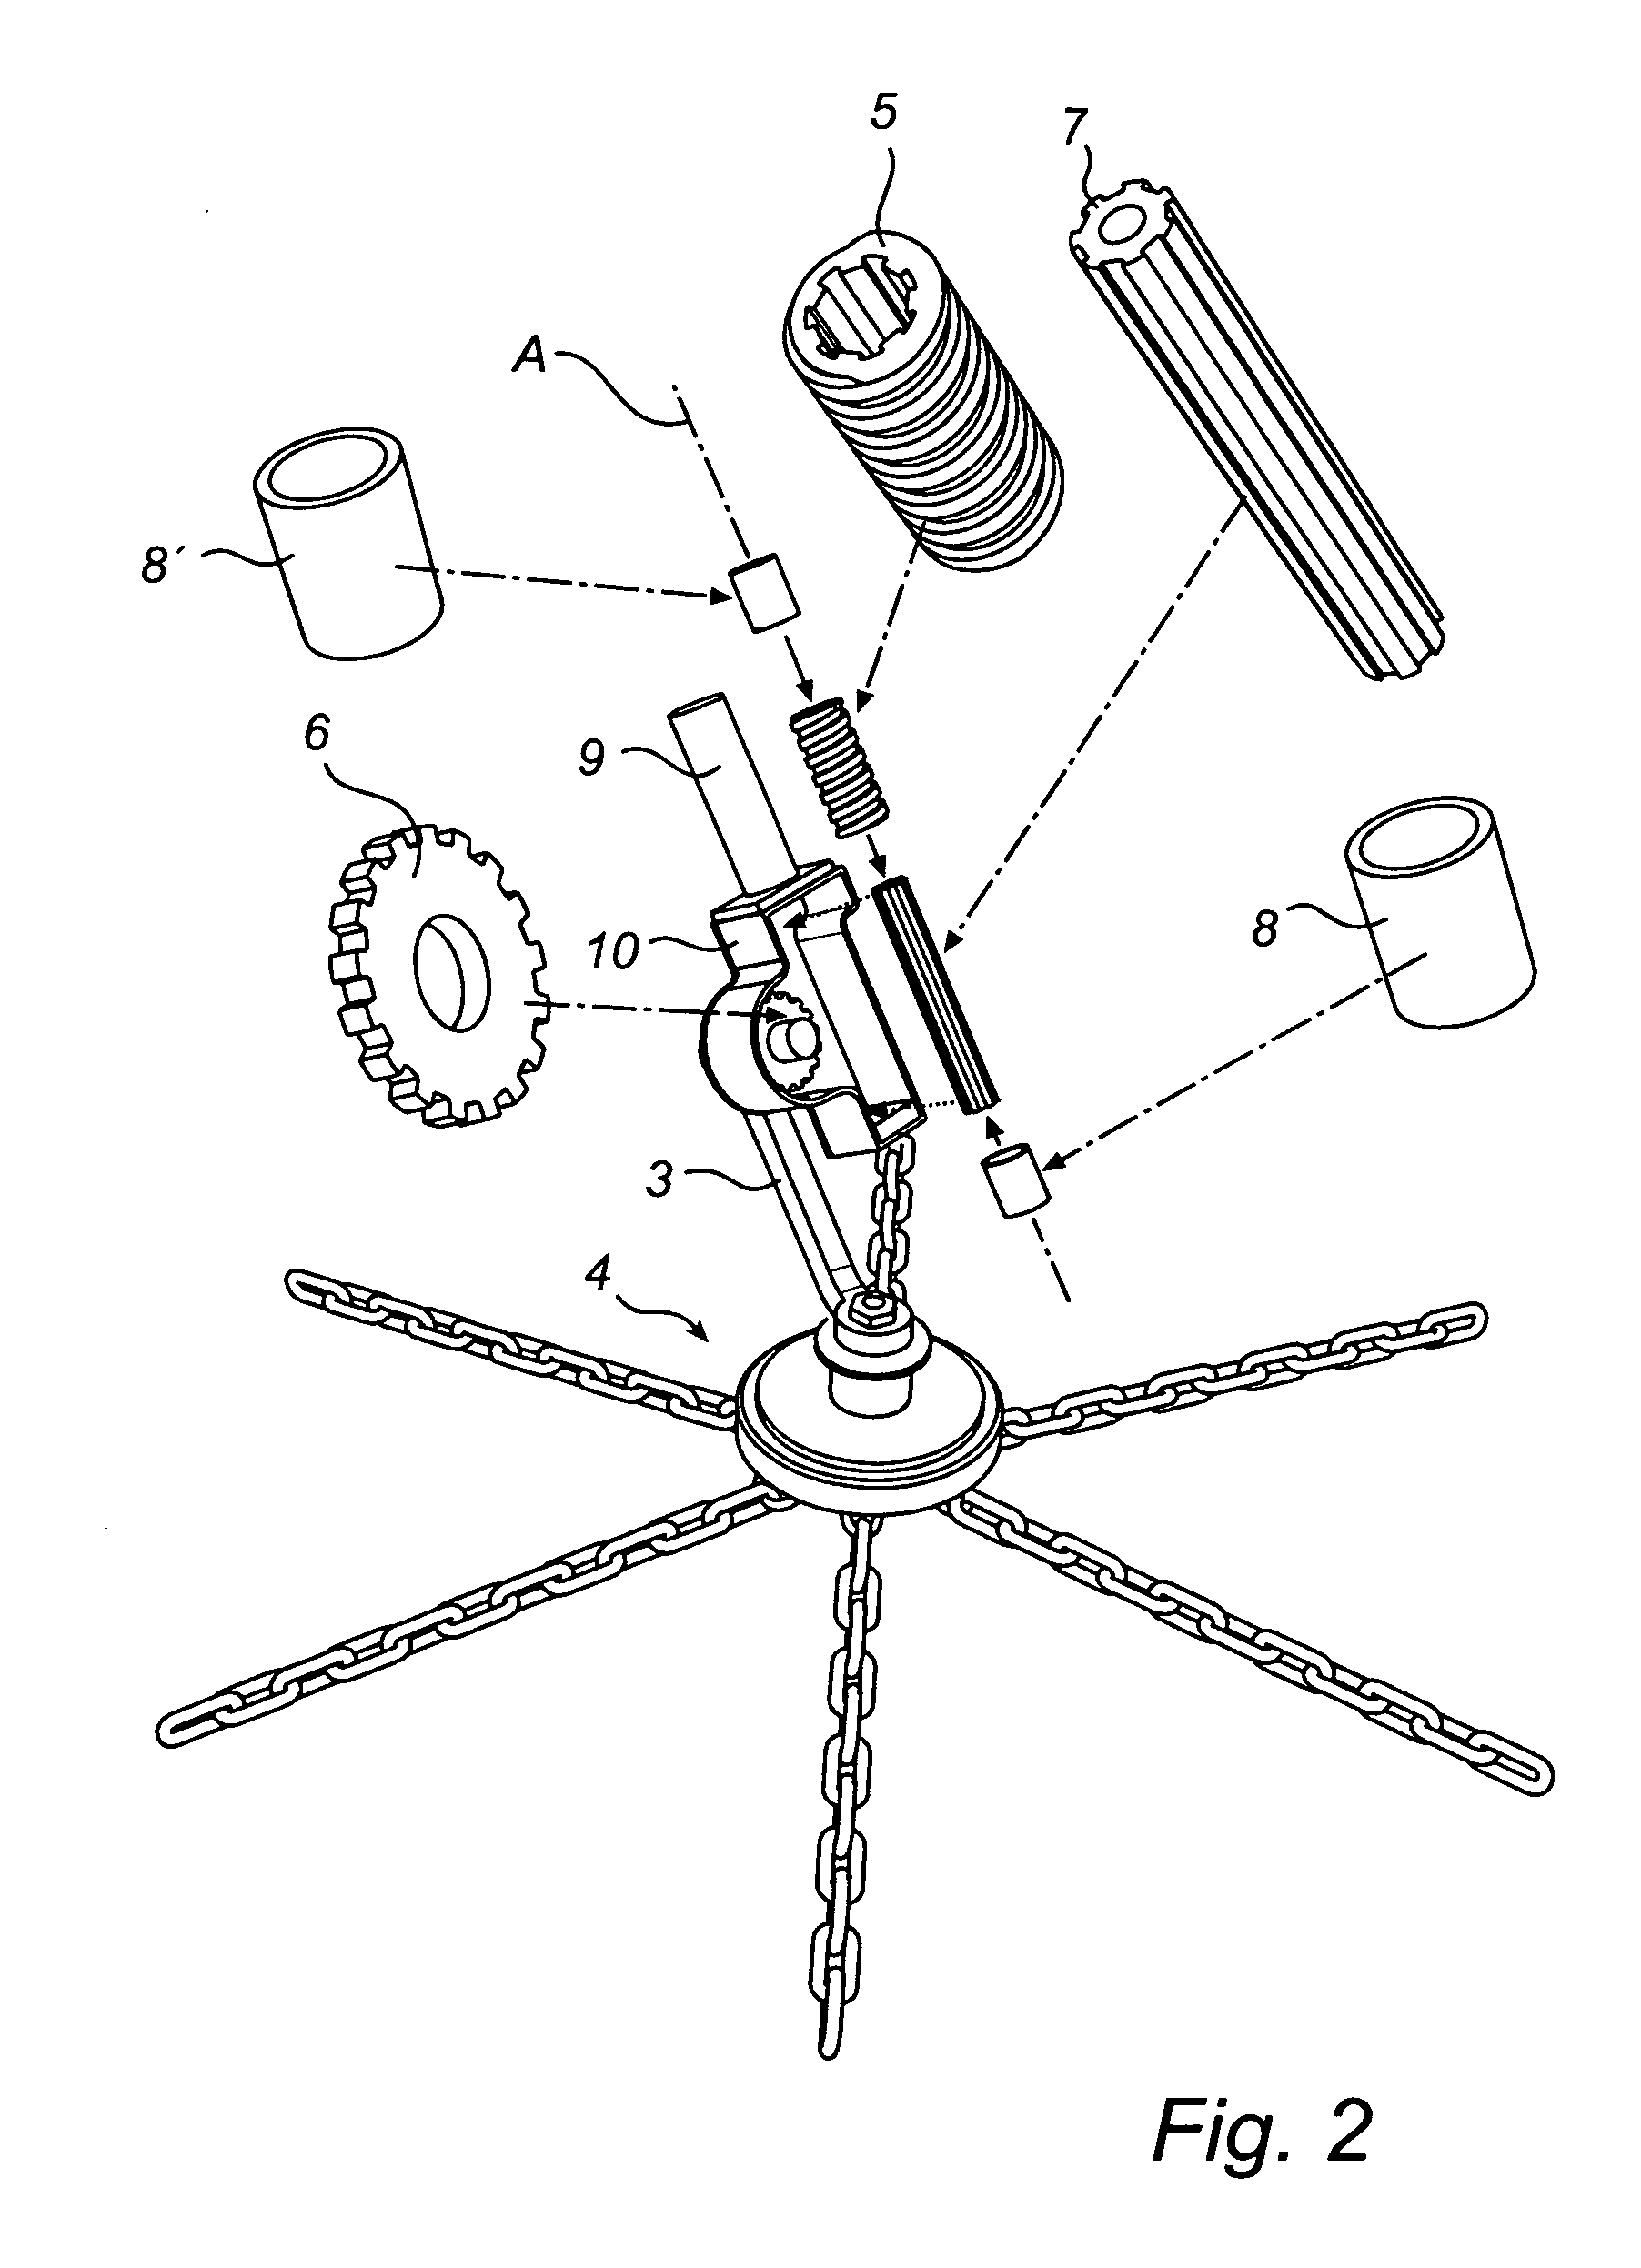 Pivoting Device for a Centrifugal Traction Assembly of a Vehicle